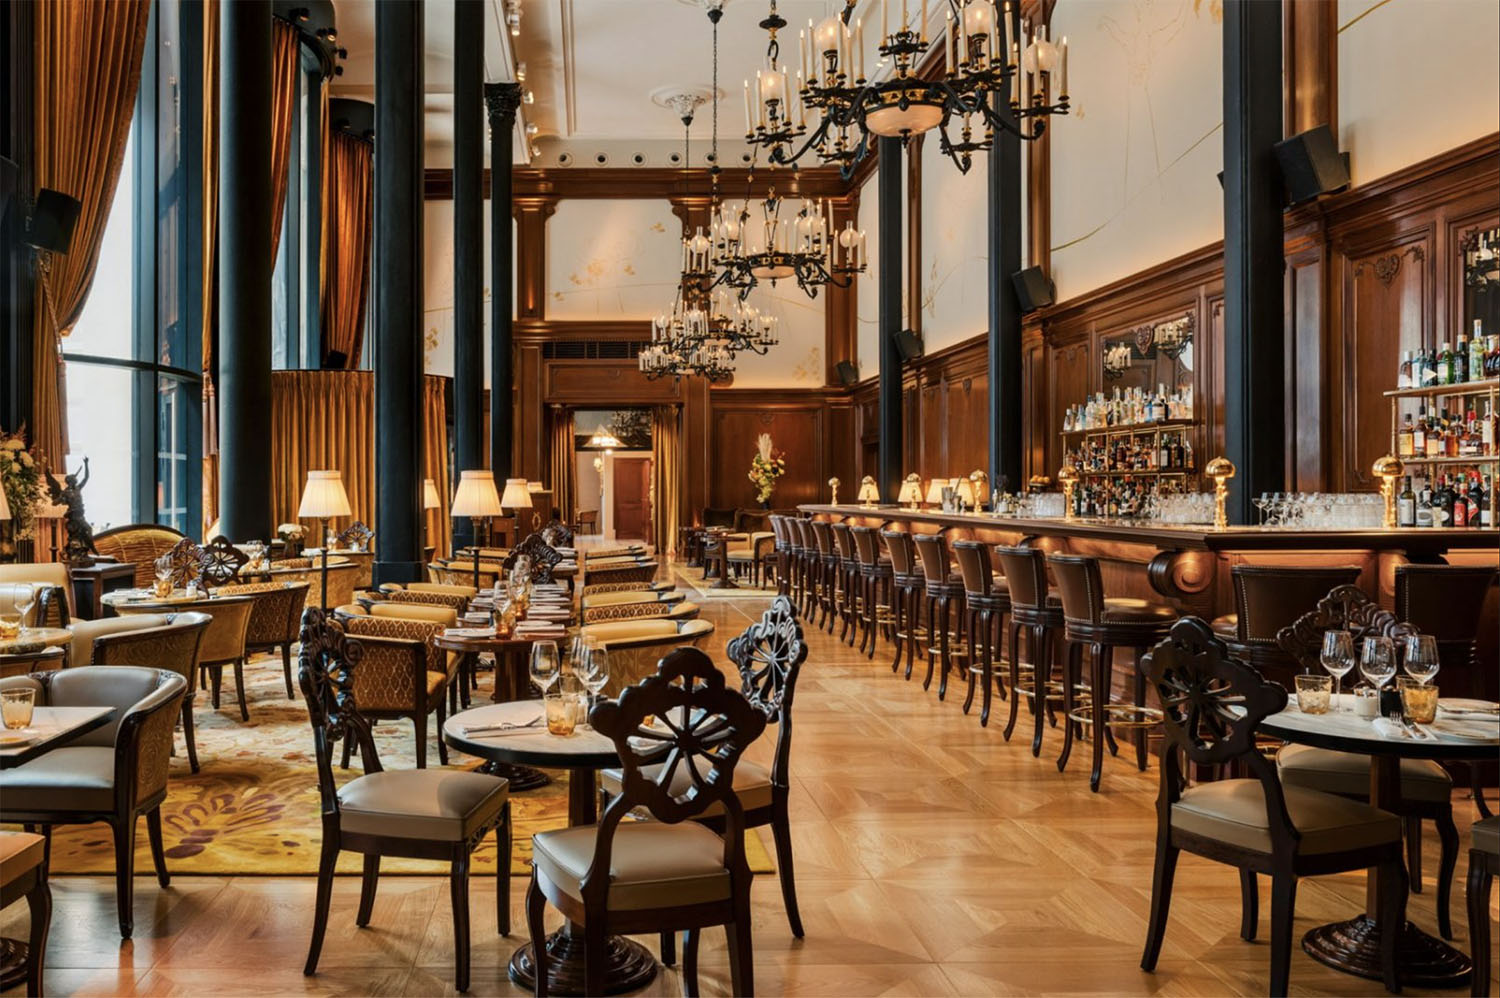 The Belle Epoque inspired interiors of Madame Rêve Cafe with double-height ceilings, wood-paneled walls, leather-cushioned chairs with hand-carved backs, ornate chandeliers and marble top tables